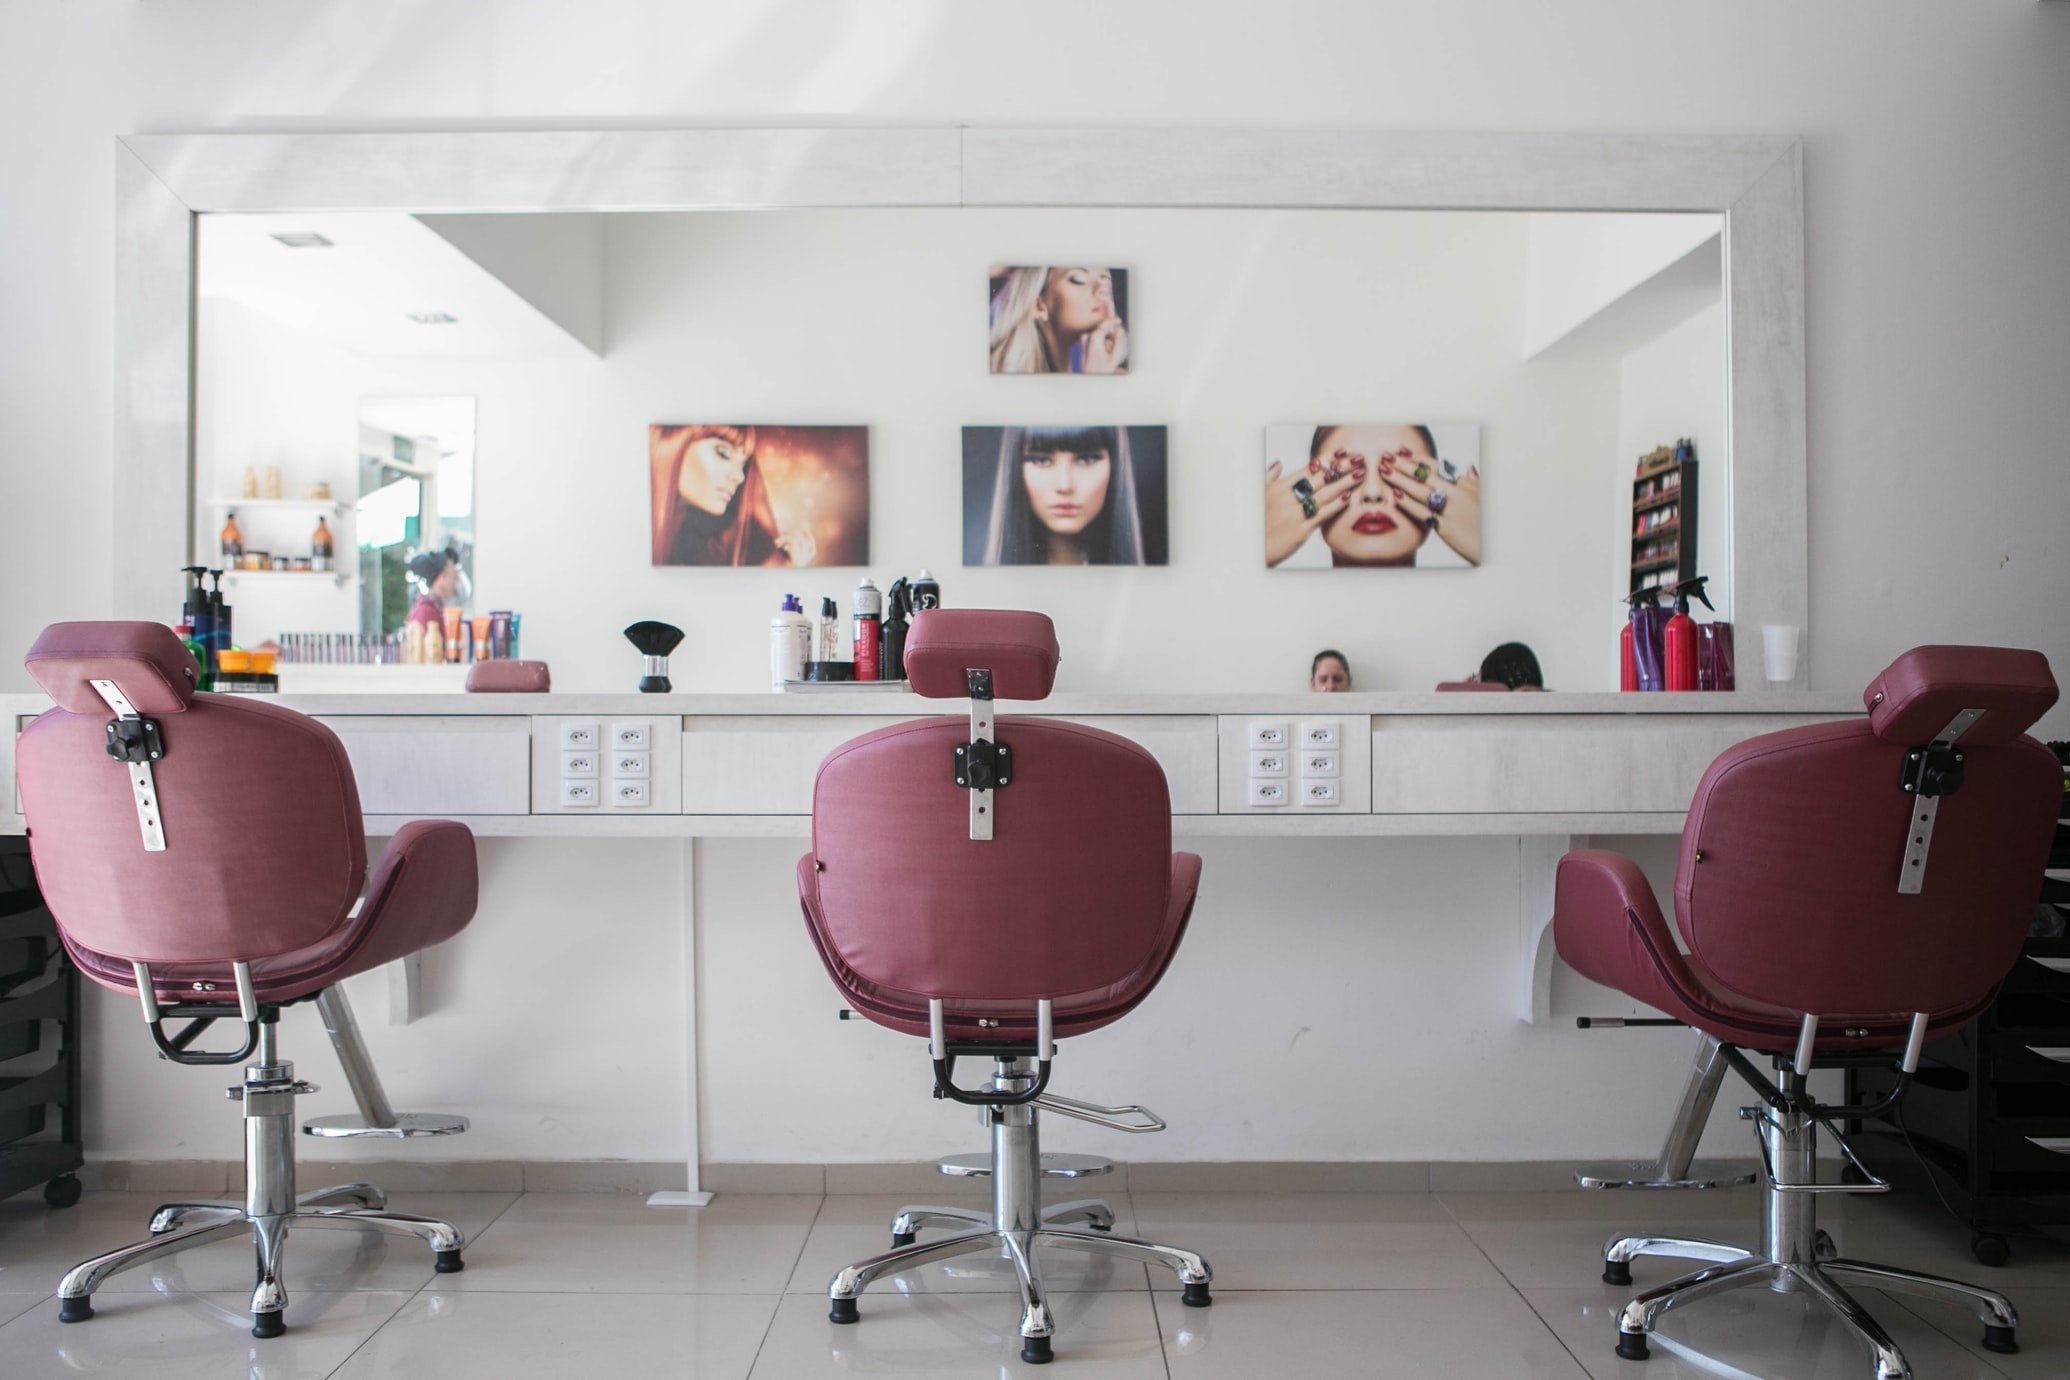 Ryan took Amber to a salon for a makeover | Source: Unsplash